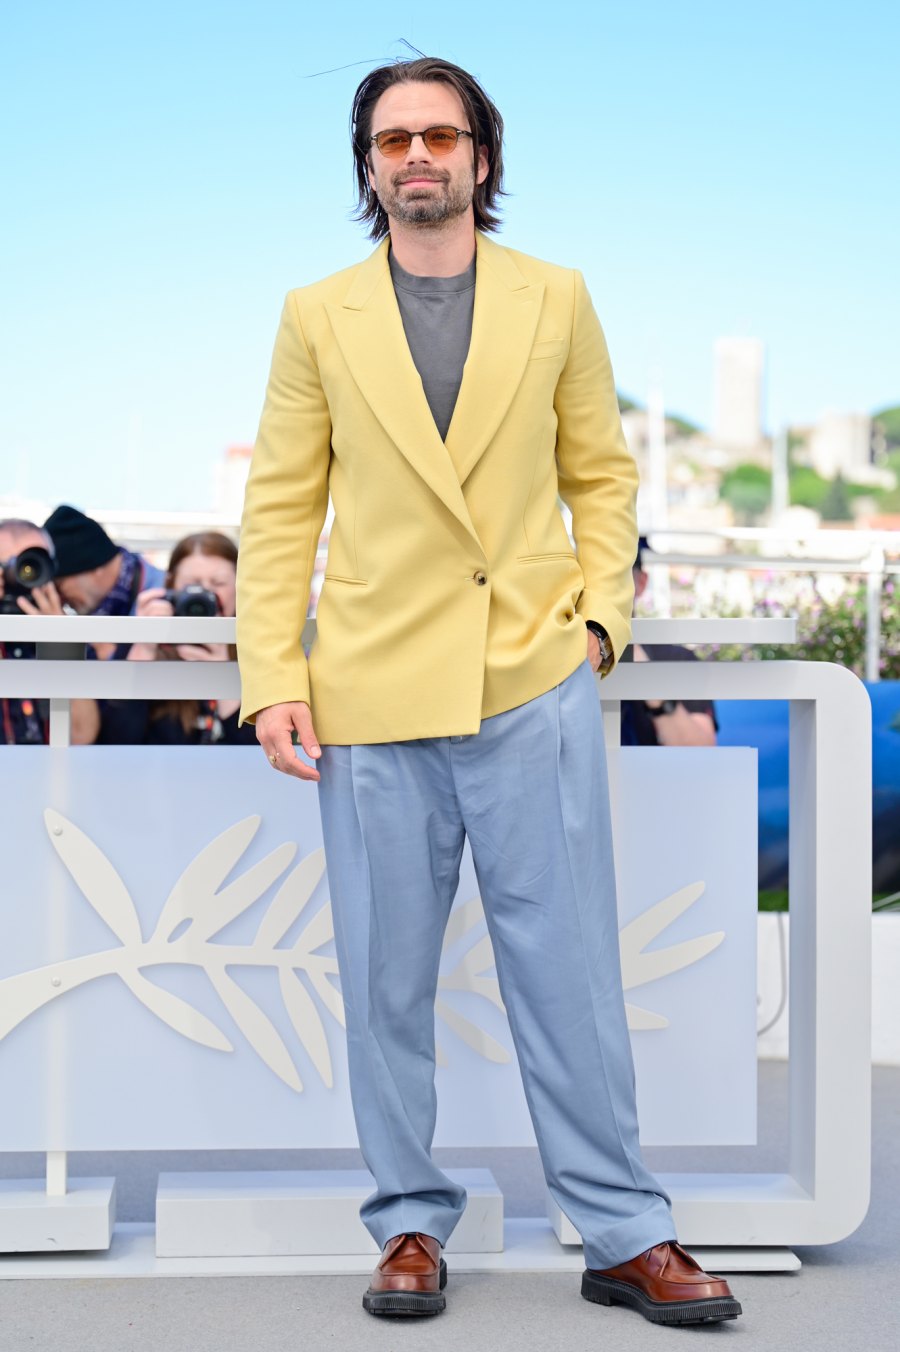 Cannes Film Festival Red Carpet Gallery Update